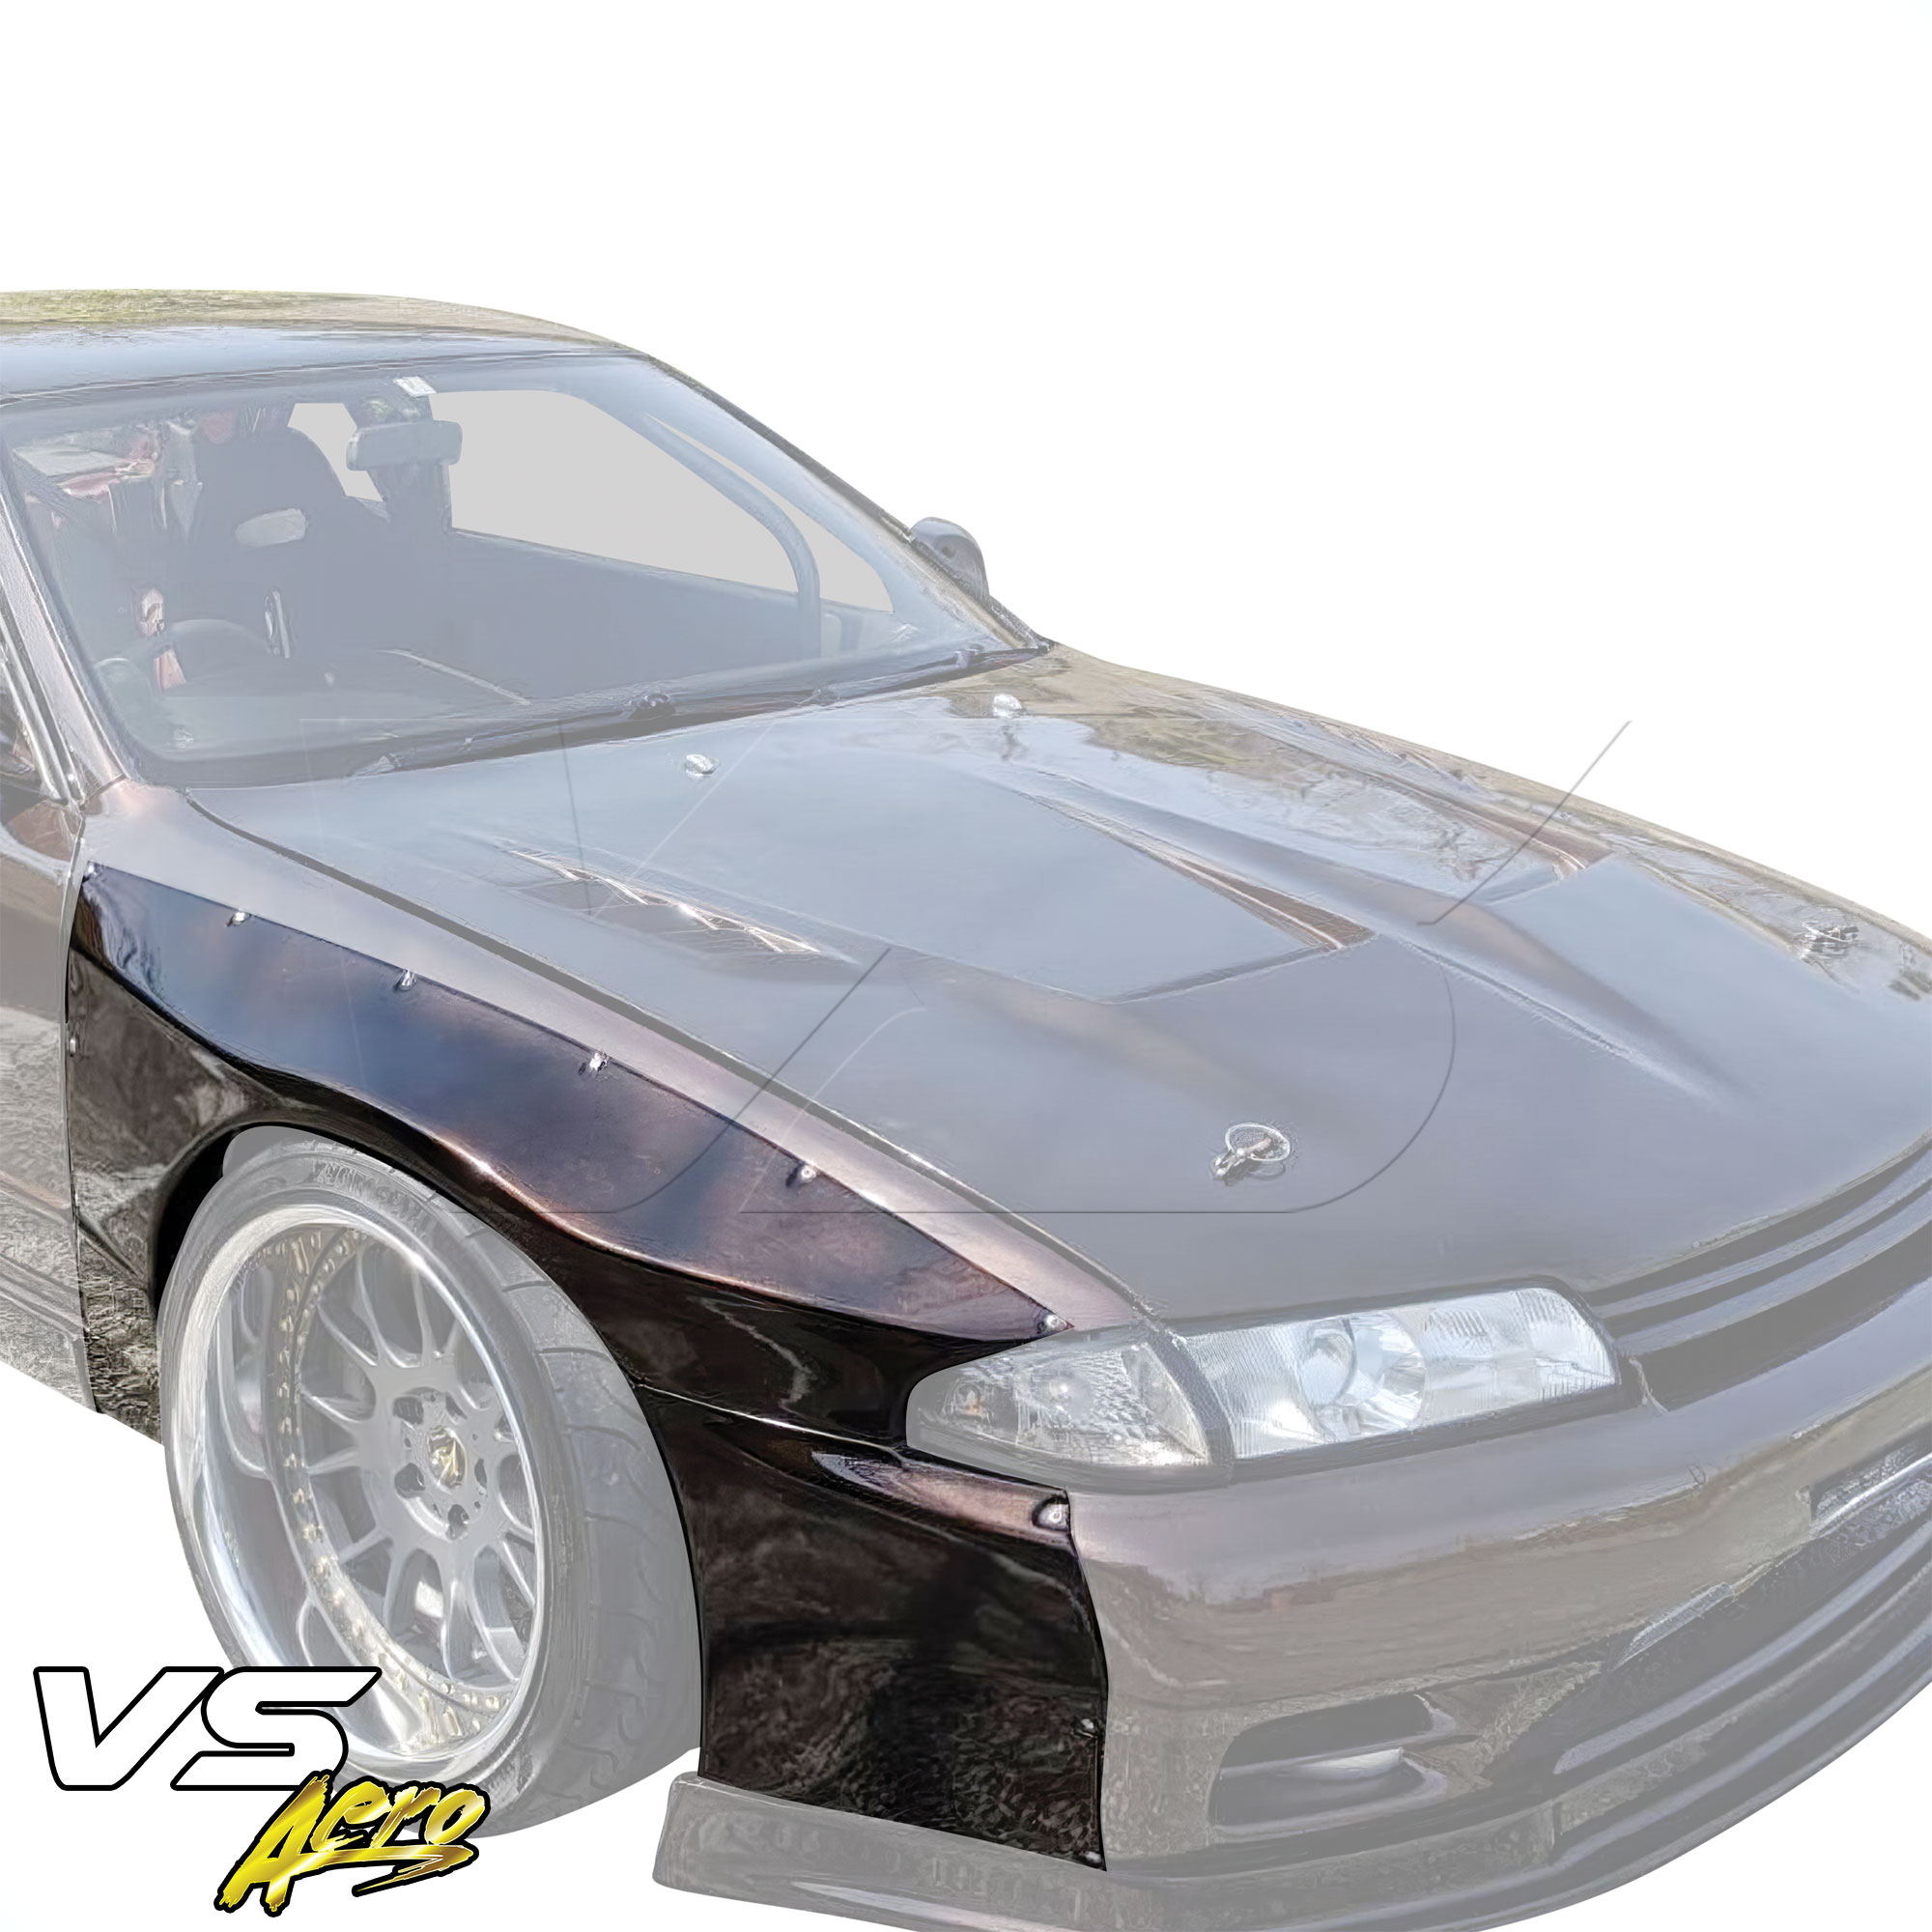 VSaero FRP TKYO Wide Body 40mm Fender Flares (front) 4pc > Nissan Skyline R32 1990-1994 > 2dr Coupe - Image 10